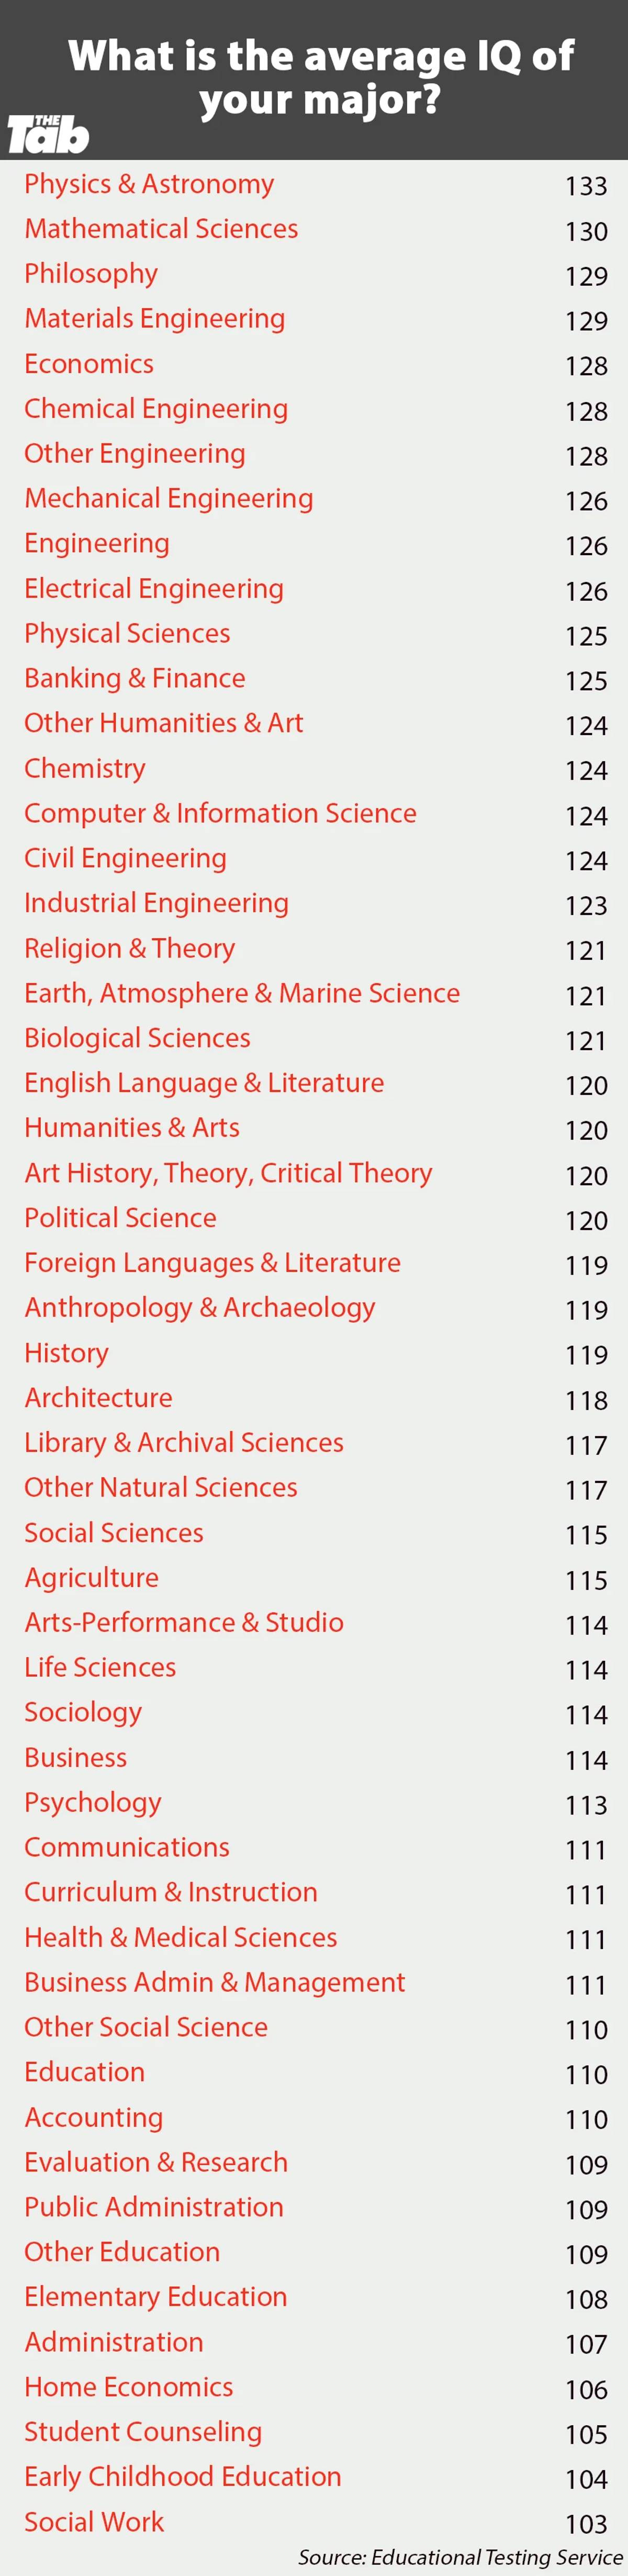 College majors ranked by average IQ